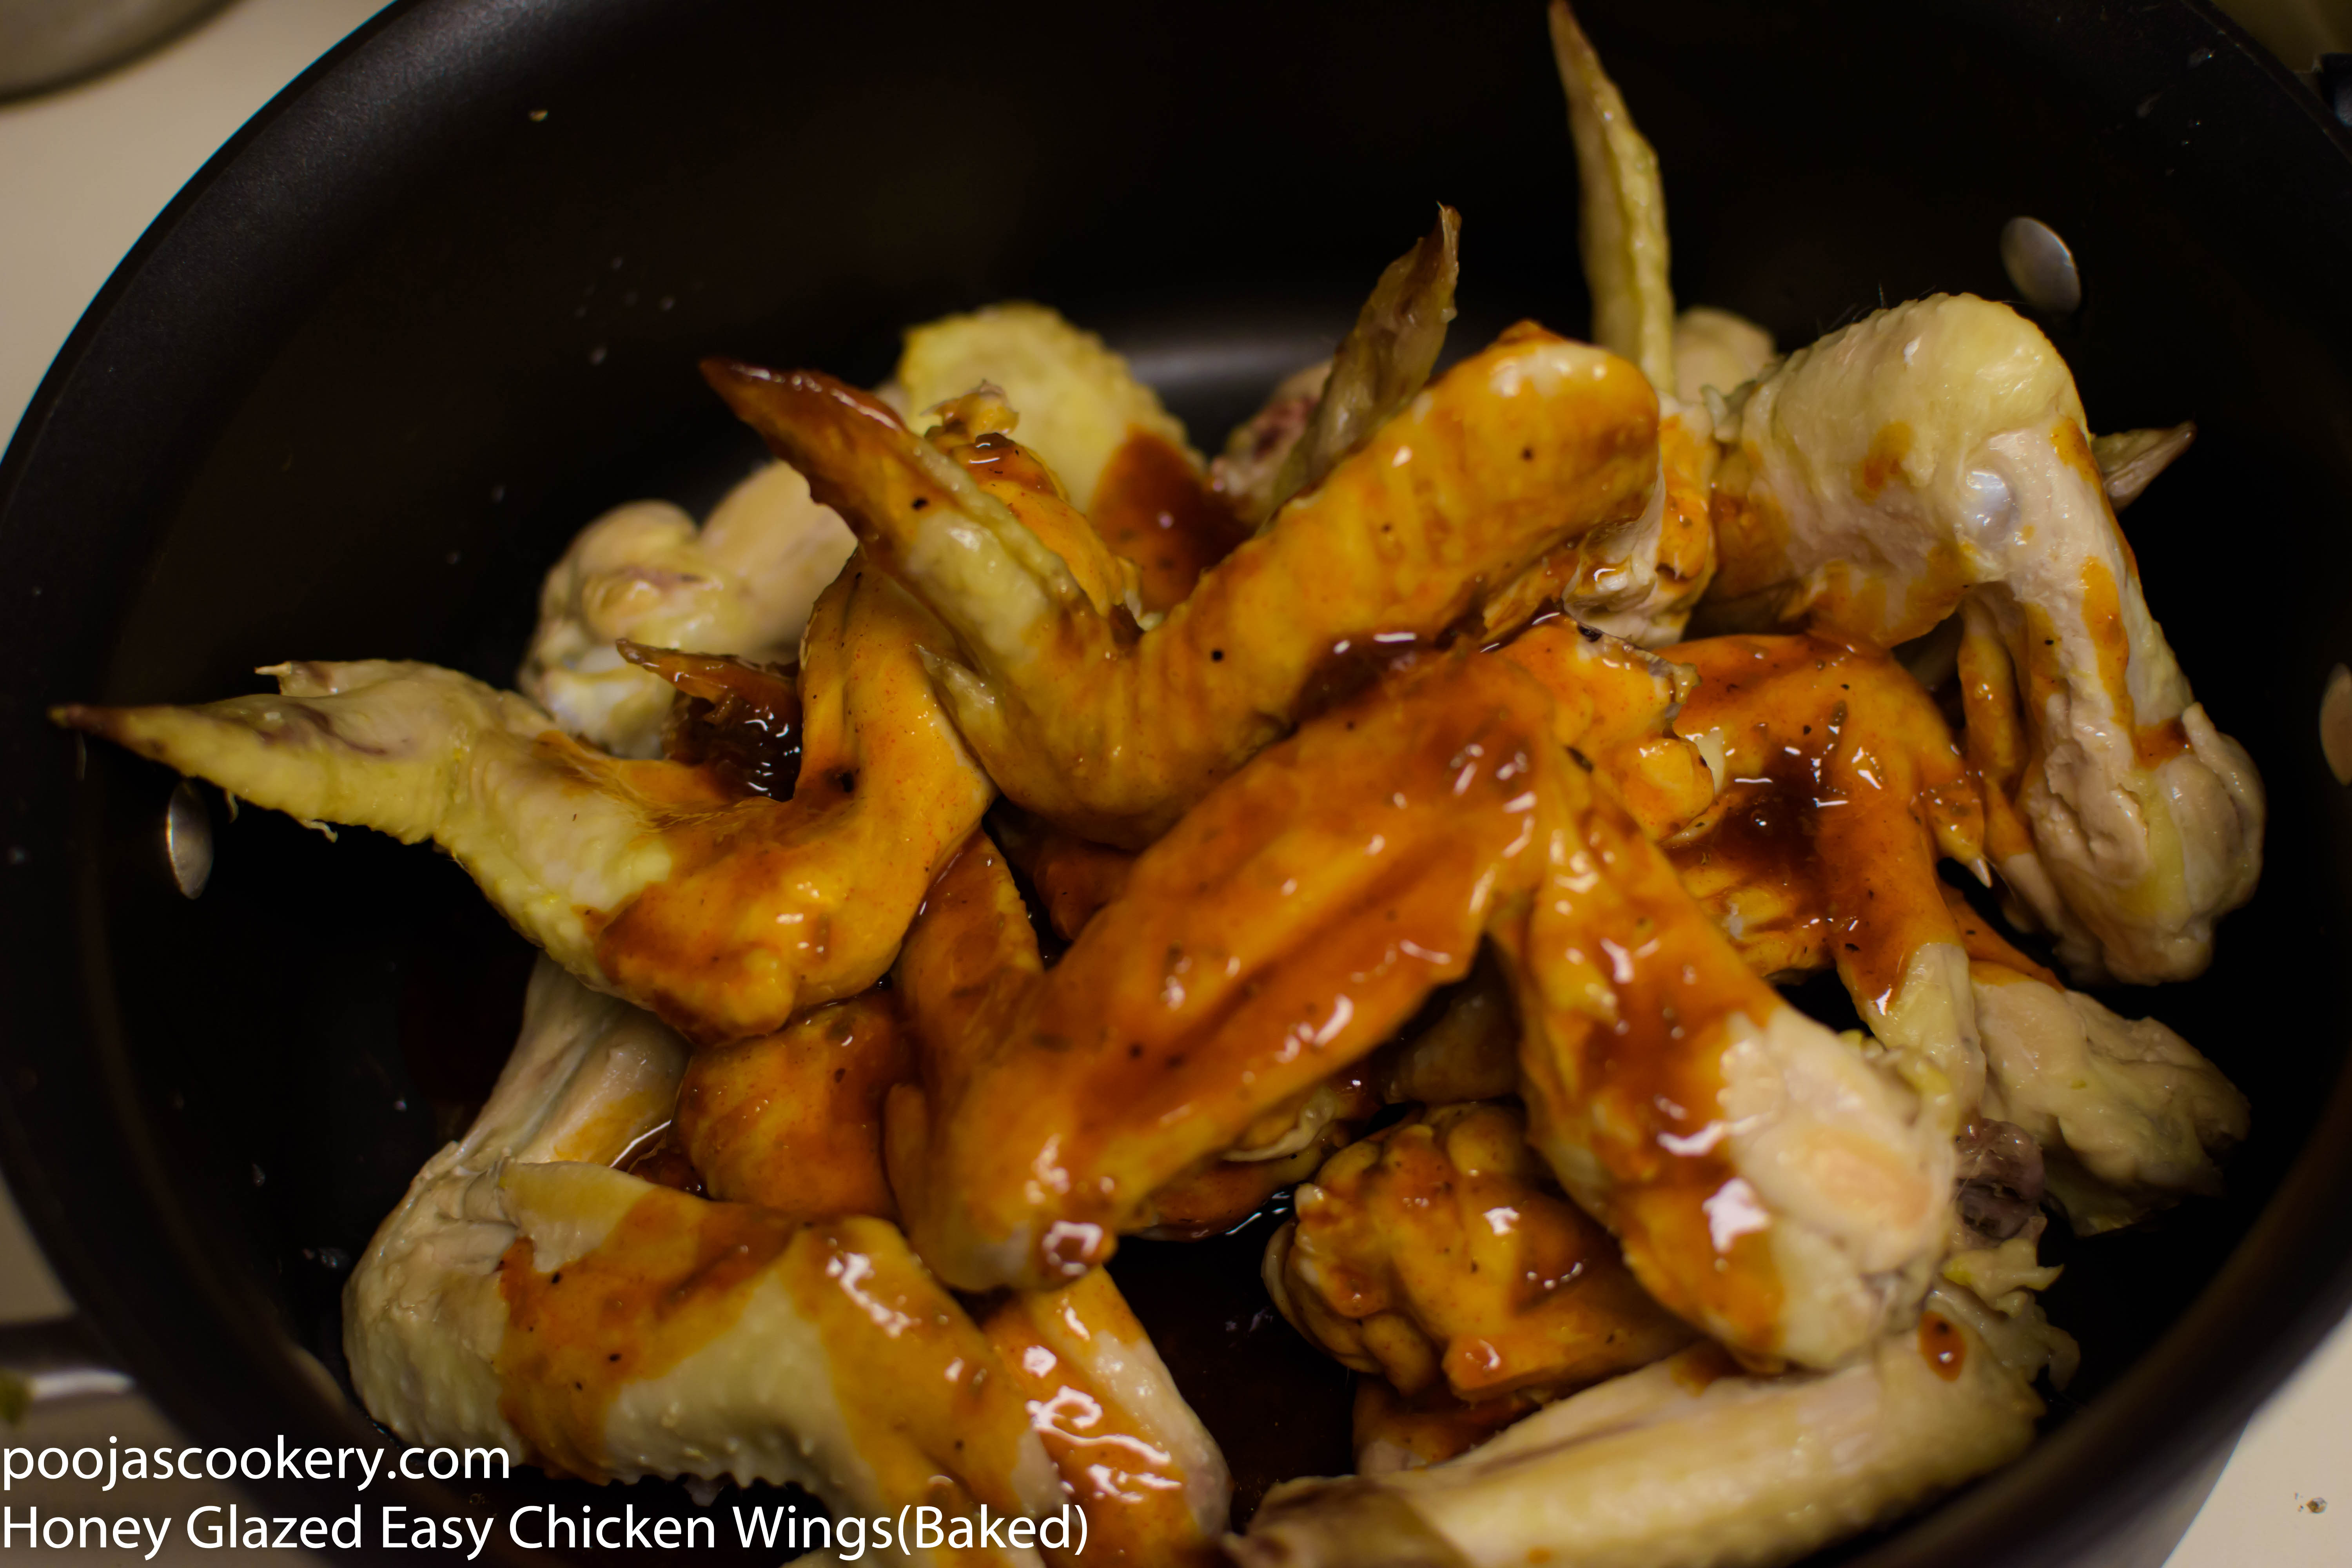 COOKERY RECIPES CHICKEN WINGS